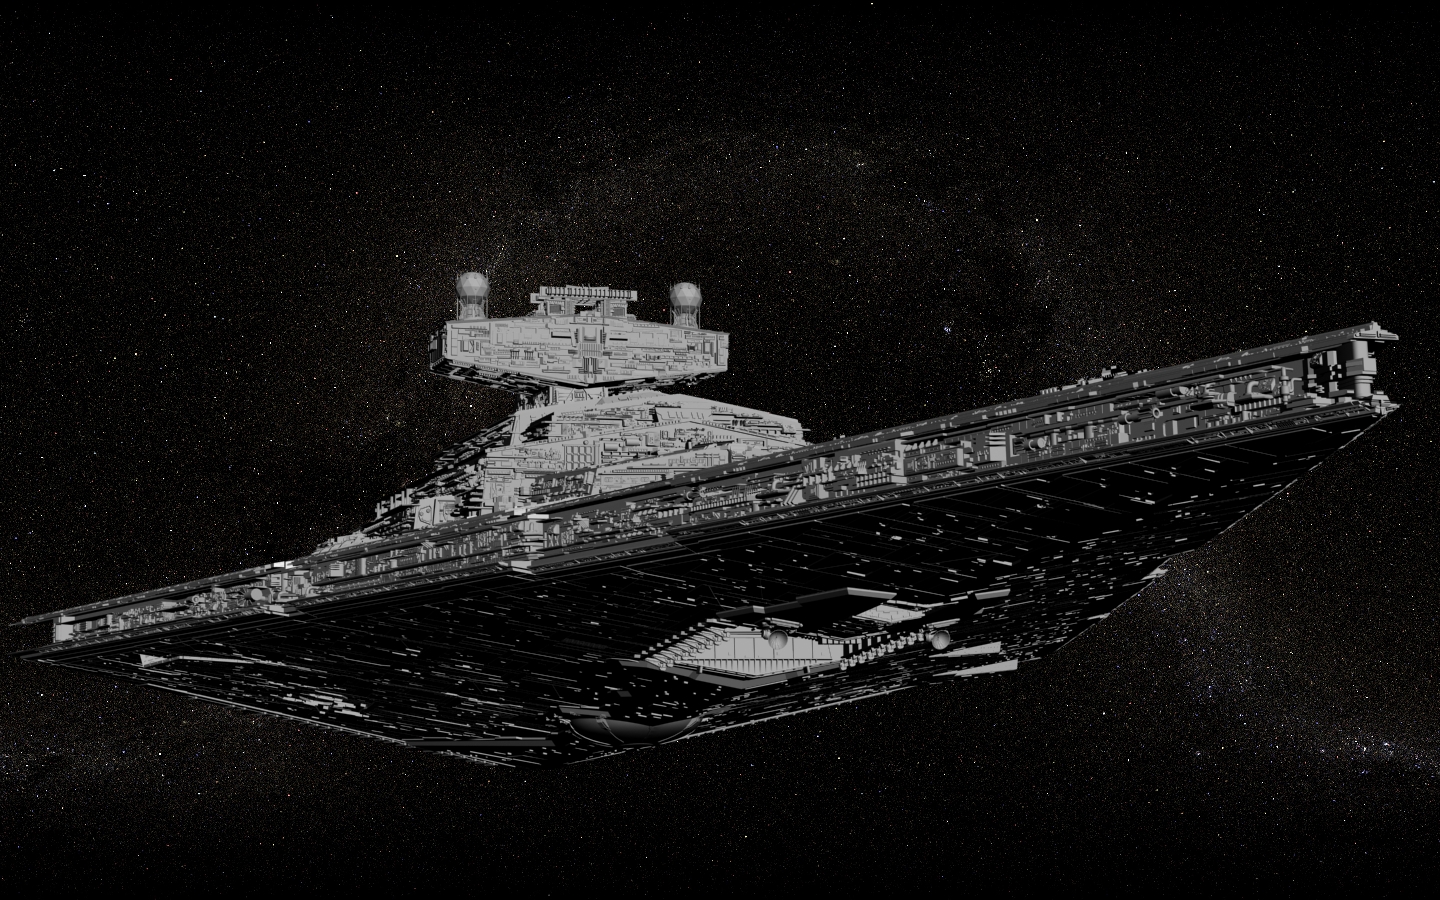 Imperial Star Destroyer HD Image Ship Wallpaper